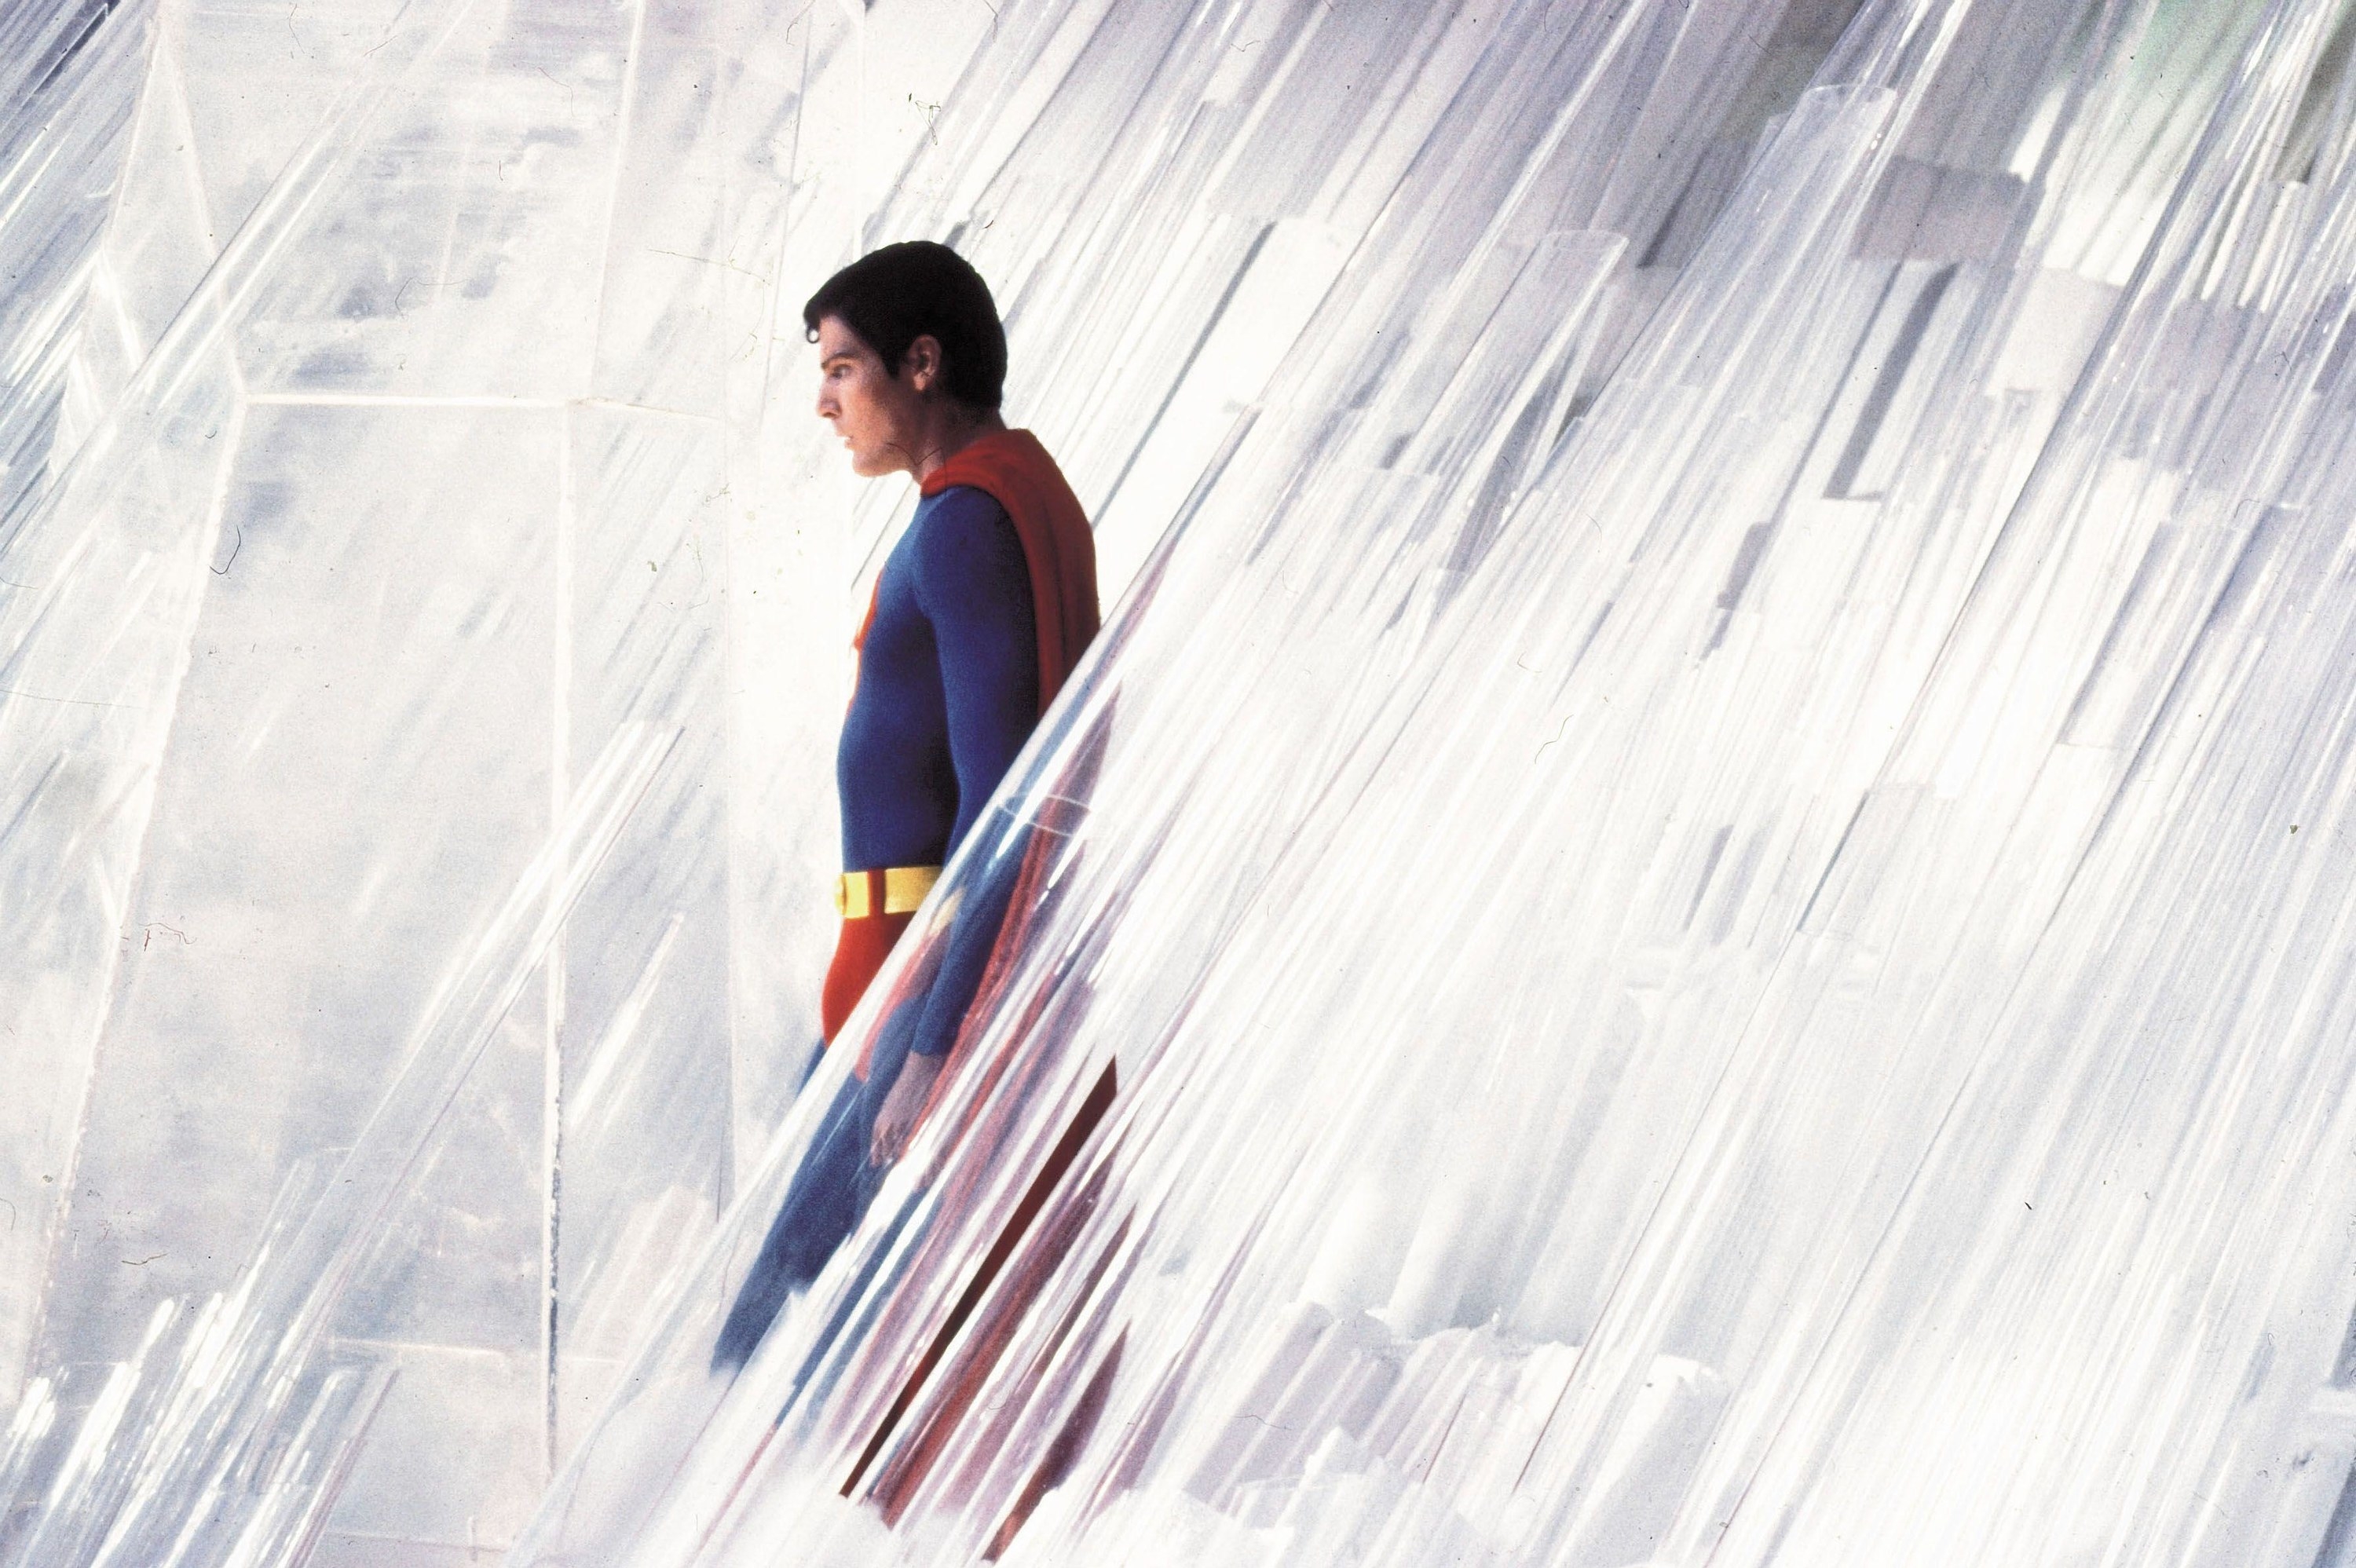 Christopher Reeve stands in the Fortress of Solitude in “Superman II”